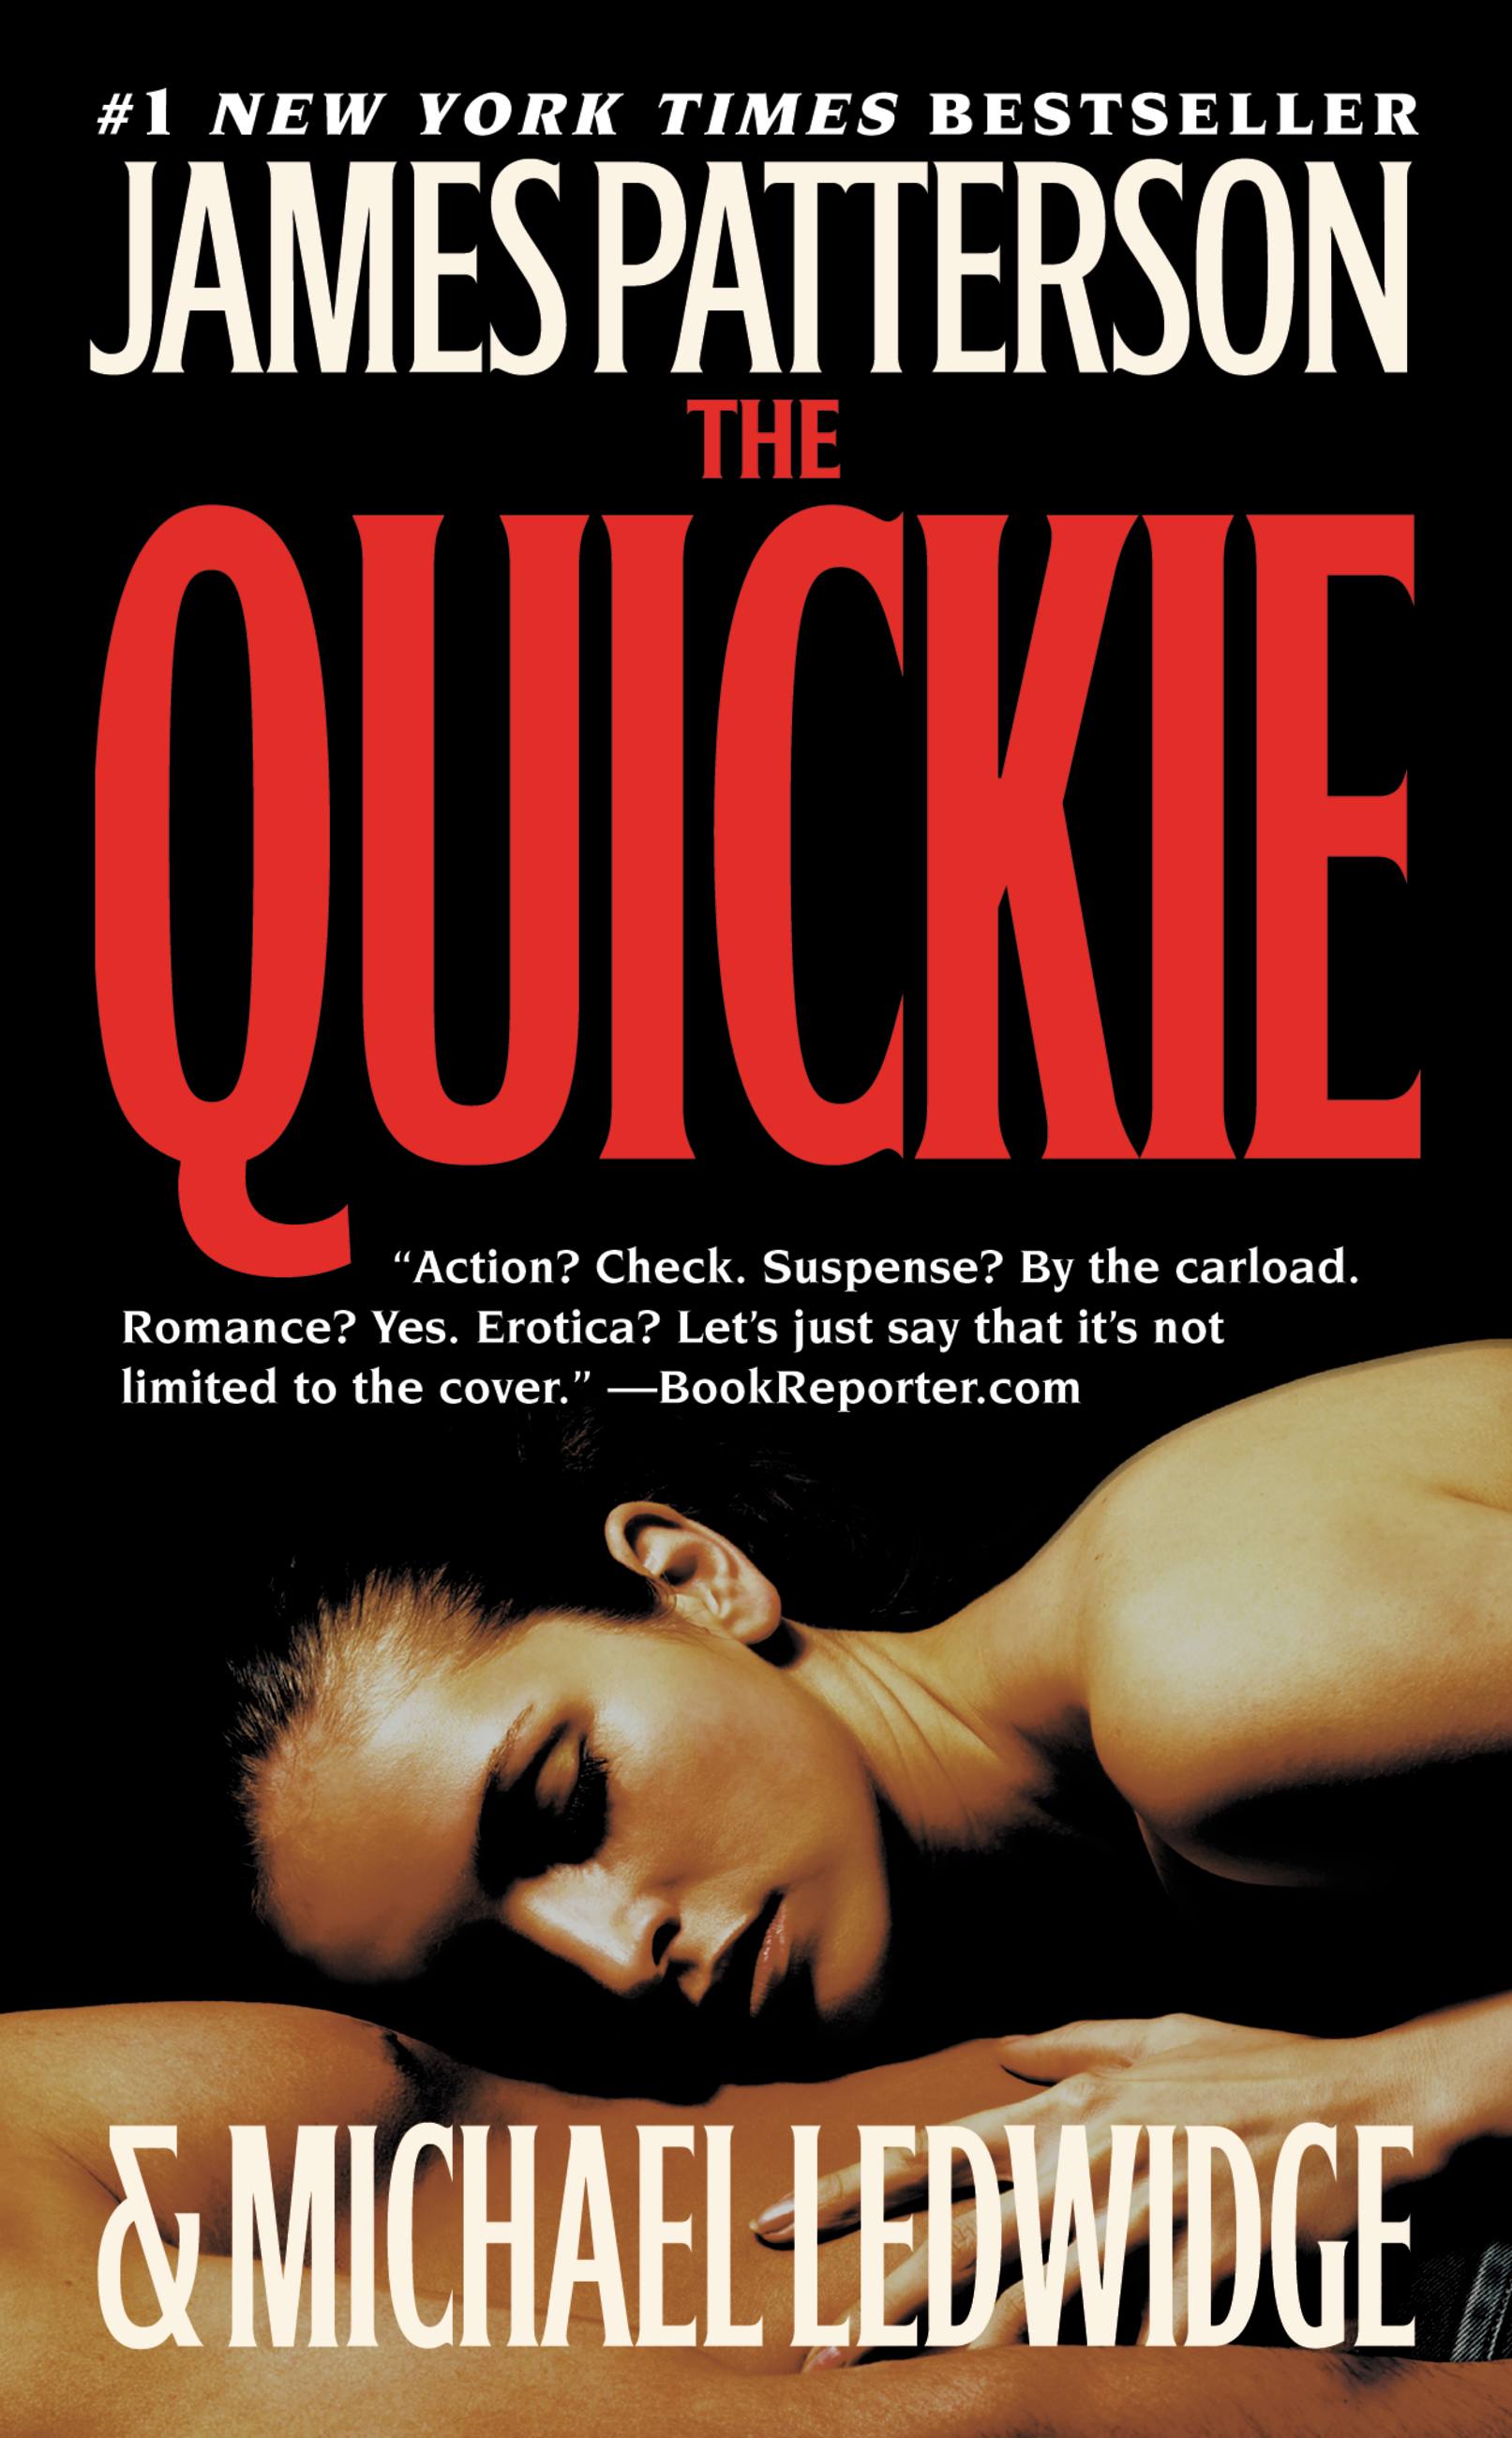 The Quickie (Paperback) - image 1 of 1